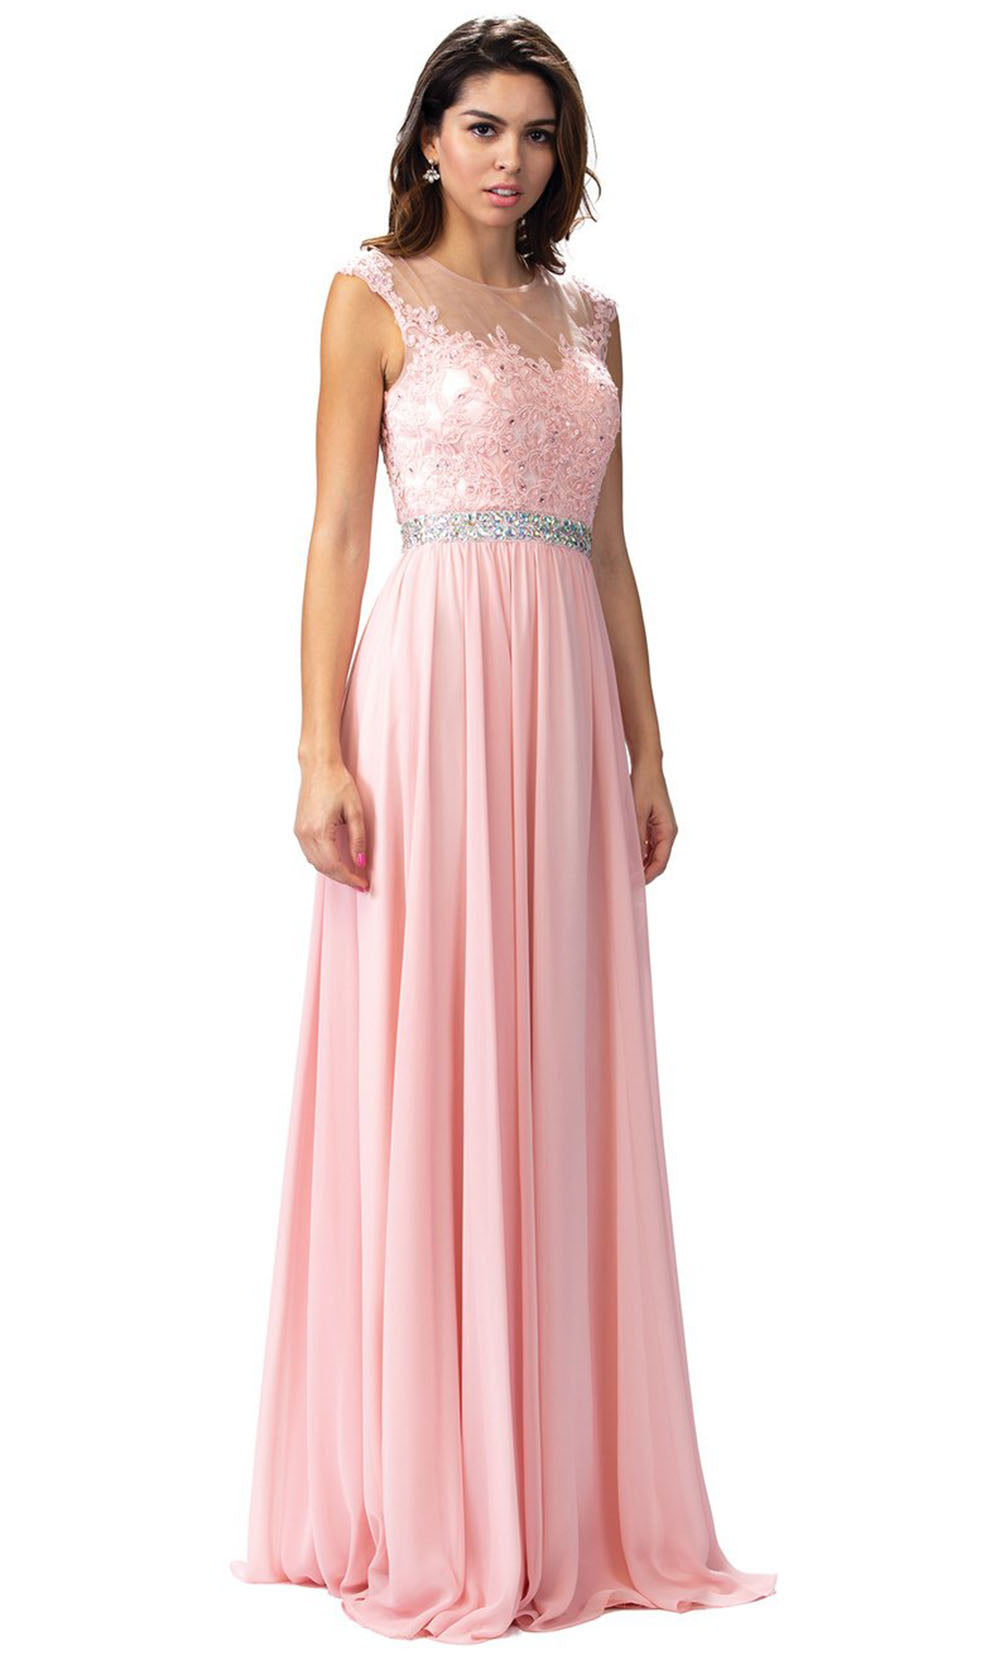 Dancing Queen - 9400 Beaded Lace Illusion Neckline A-Line Gown In Pink